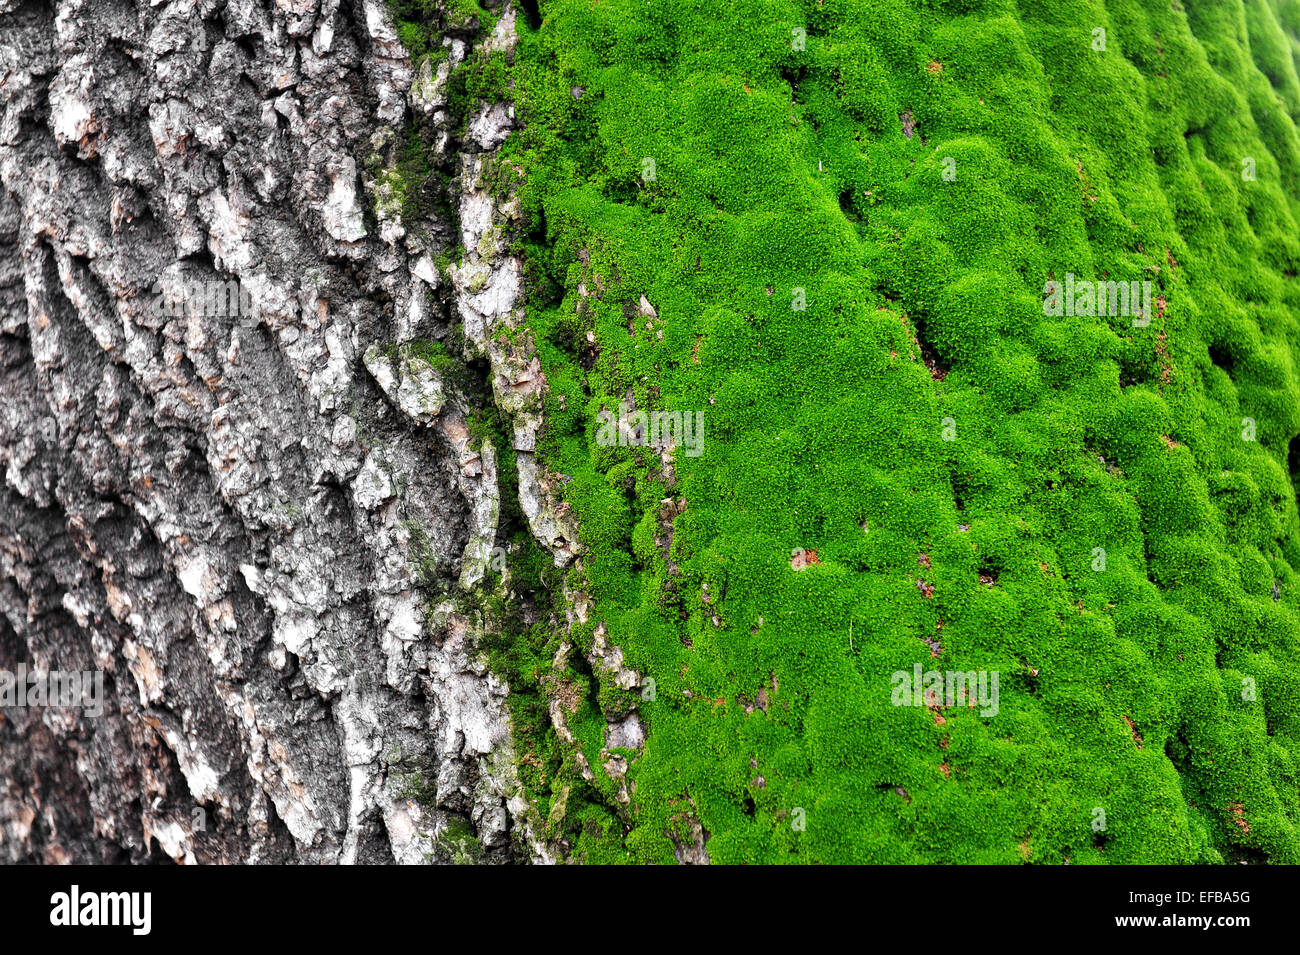 Half a tree trunk covered with green moss Stock Photo